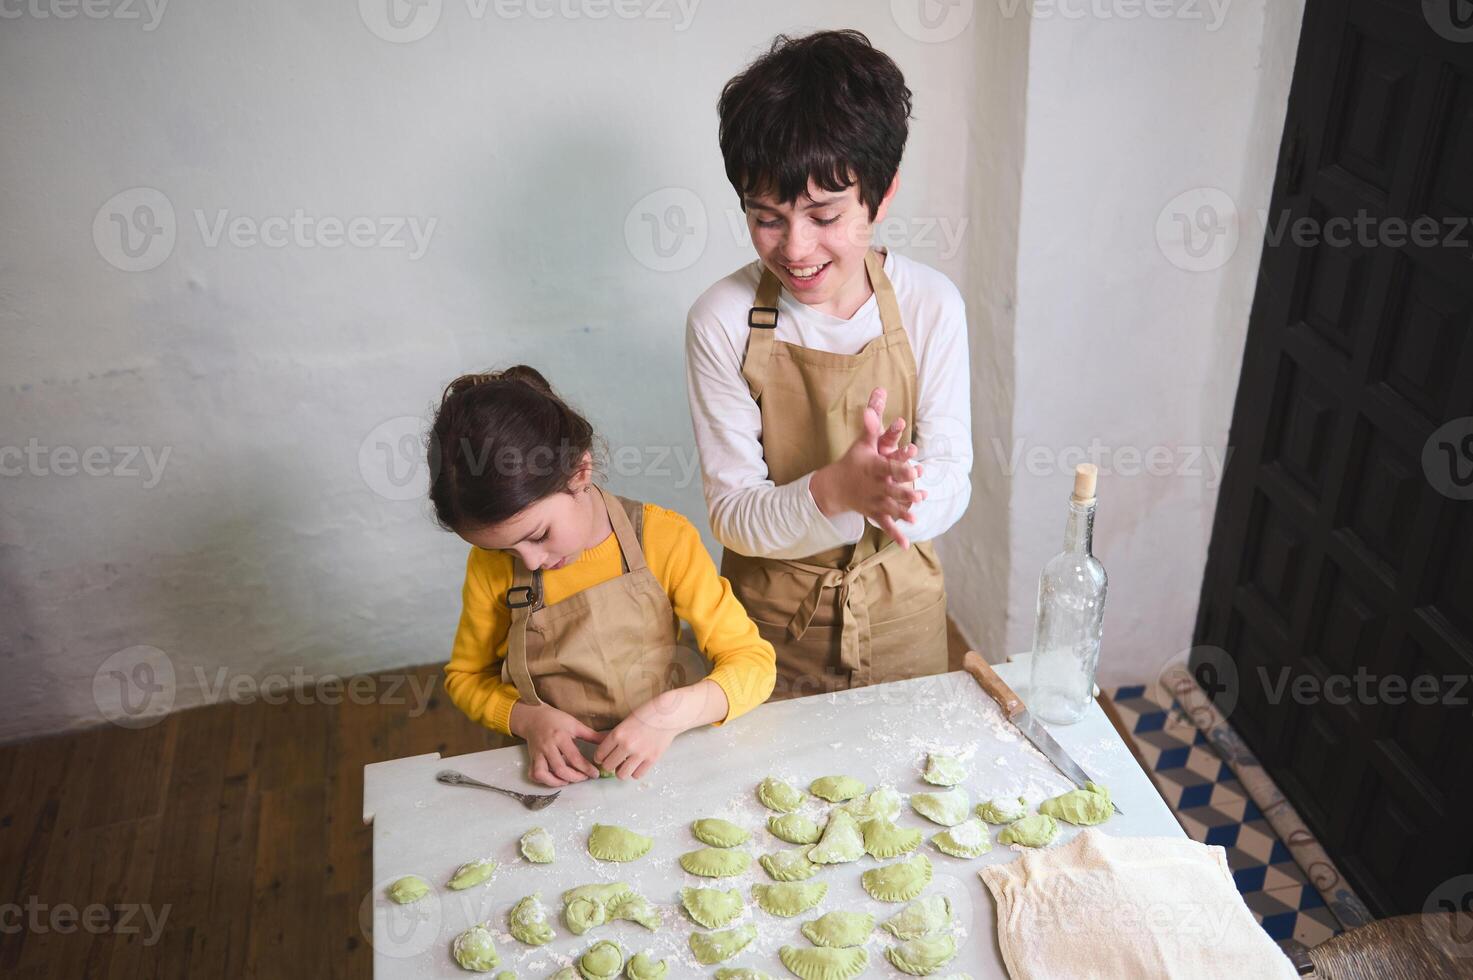 Cooking class for kids. Two kids, boy and girl preparing family dinner, standing at floured kitchen table and modeling dumplings or Ukrainian varennyky in the rural house kitchen interior. Top view photo